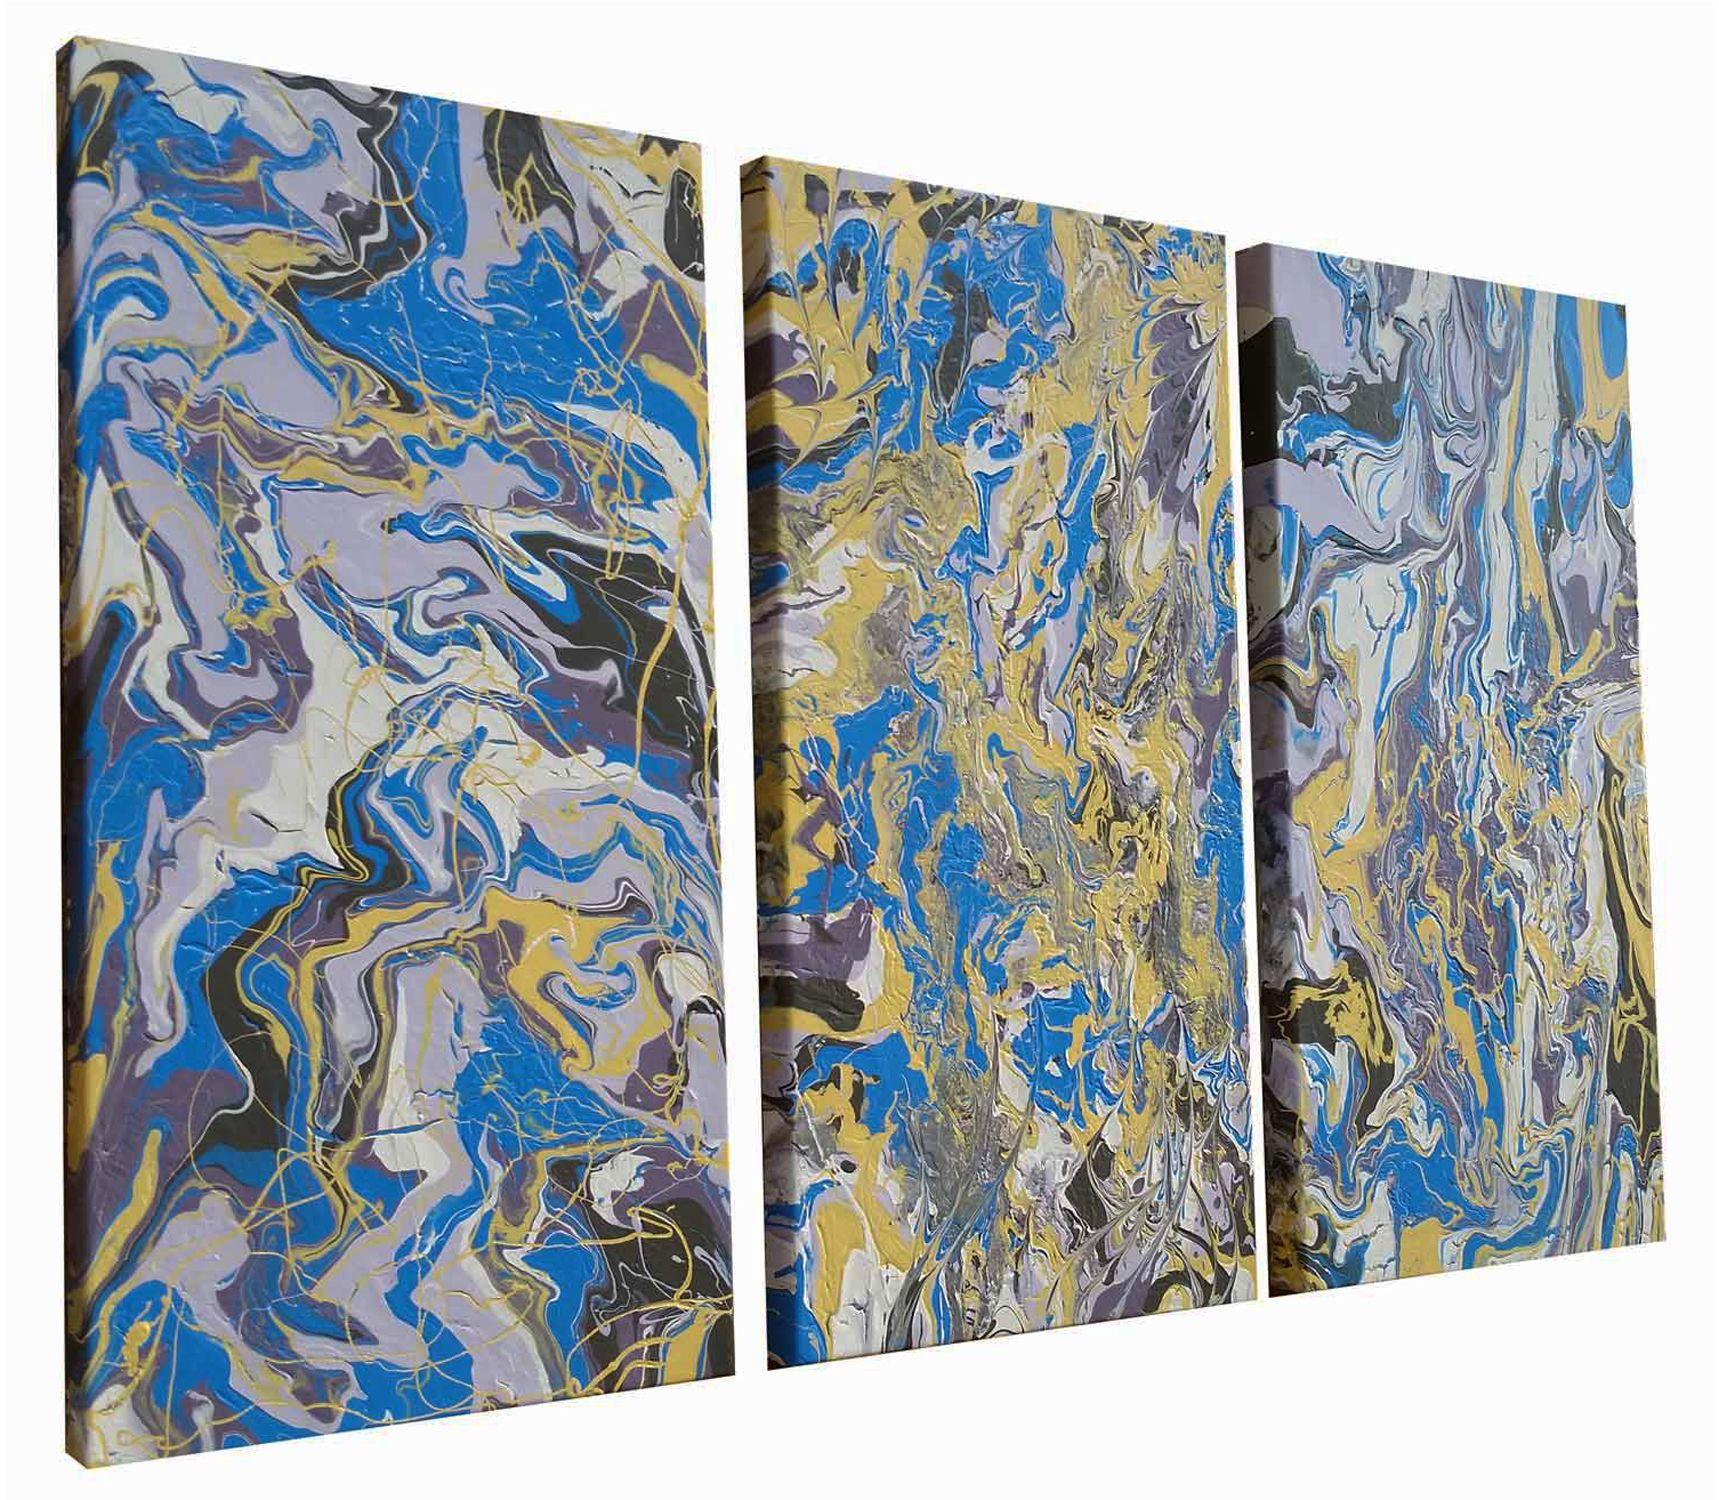 This multi-panel abstract expressionism painting features three unique pieces. It involved layering acrylic paints on top of each other and twisting the canvas, allowing the paint to flow until I reached the desired effect by using gravity as I